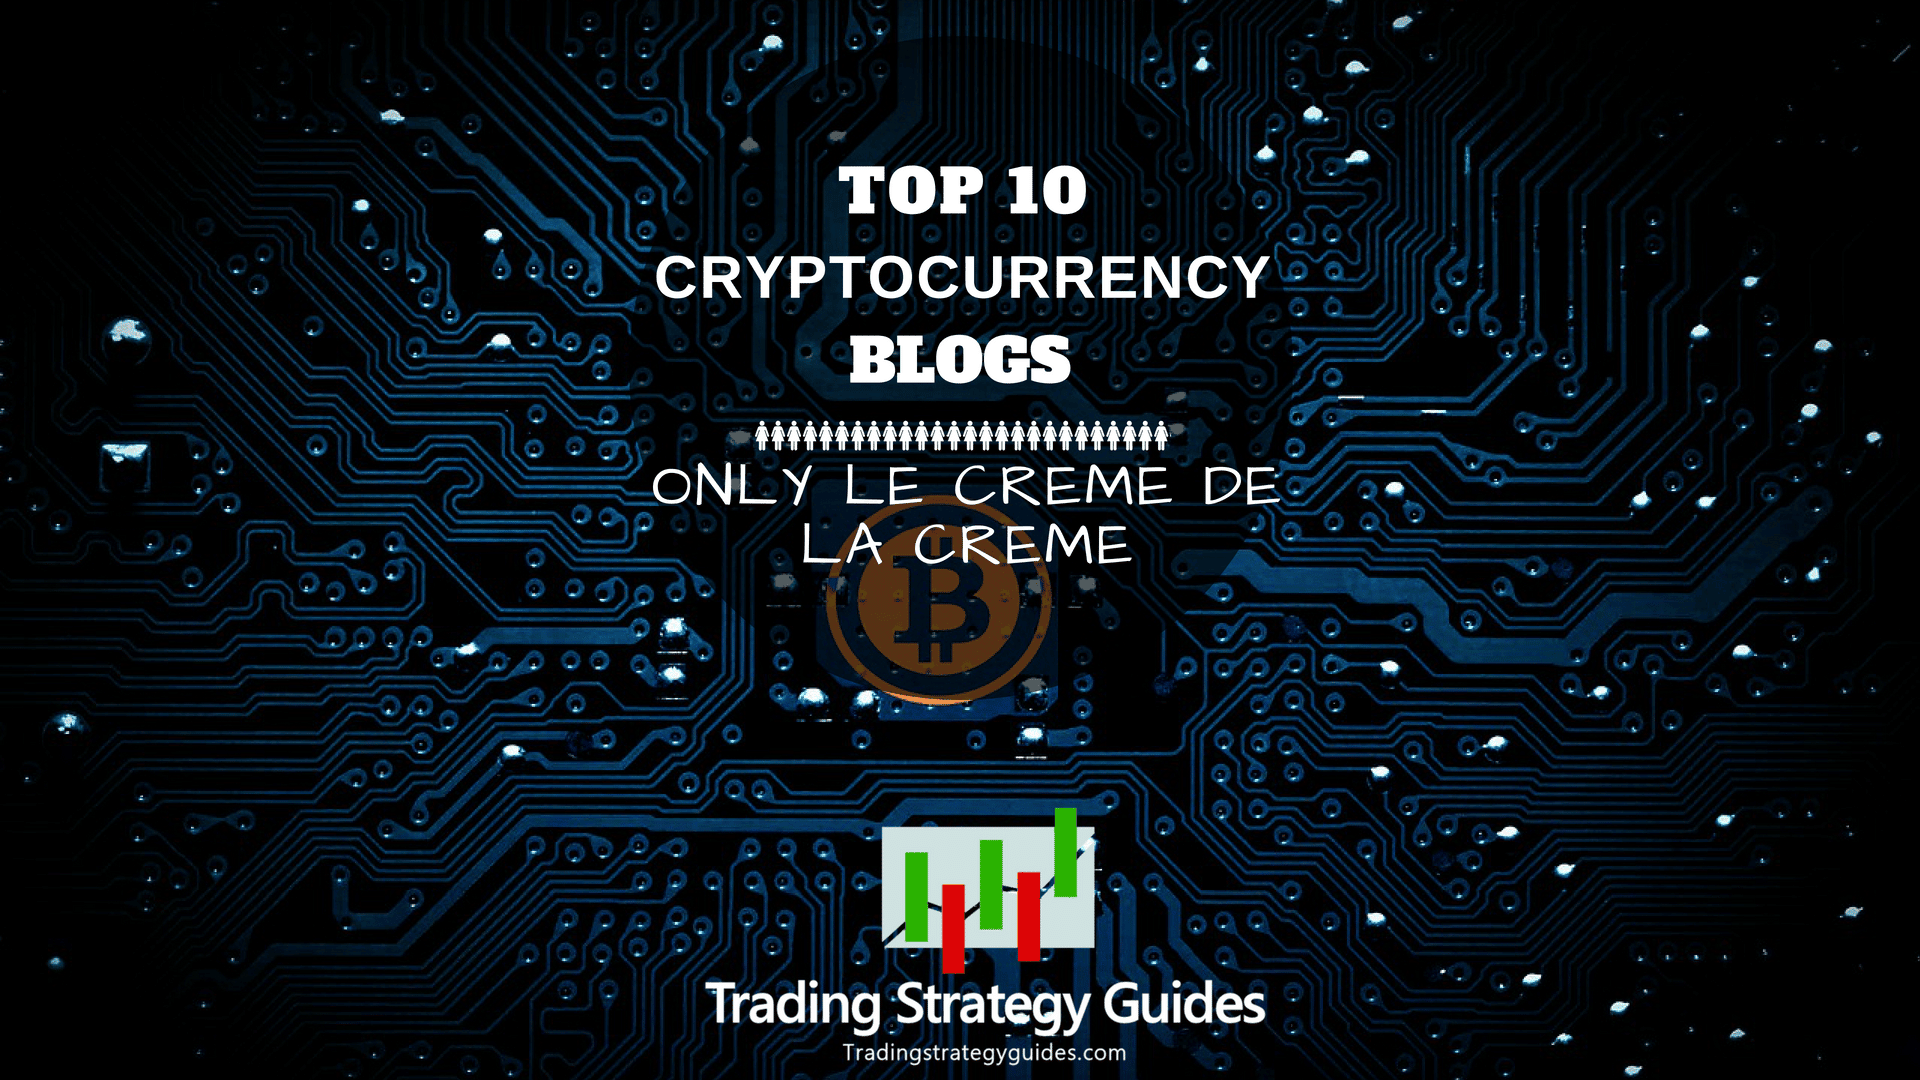 Top 8 Cryptocurrency Blogs